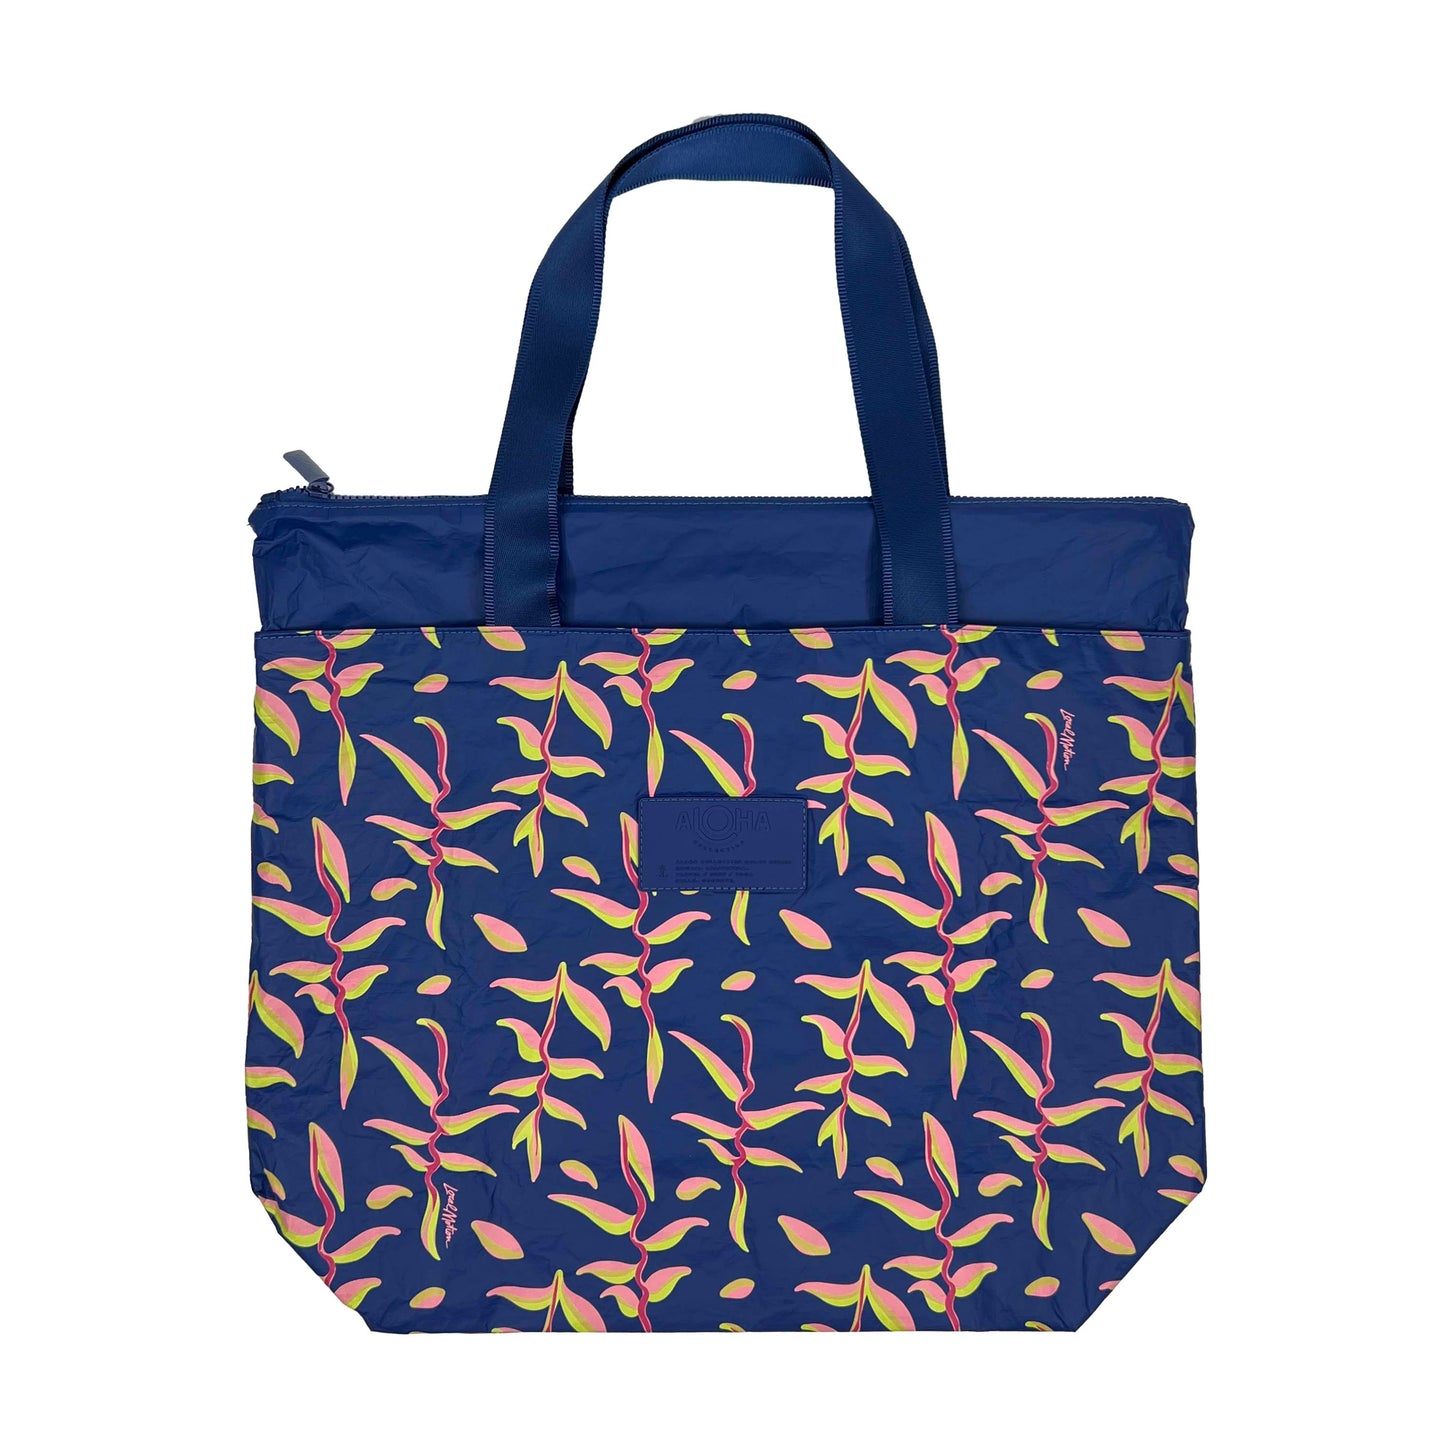 "HELICONIA" LOCAL MOTION DAY TRIPPER TOTE